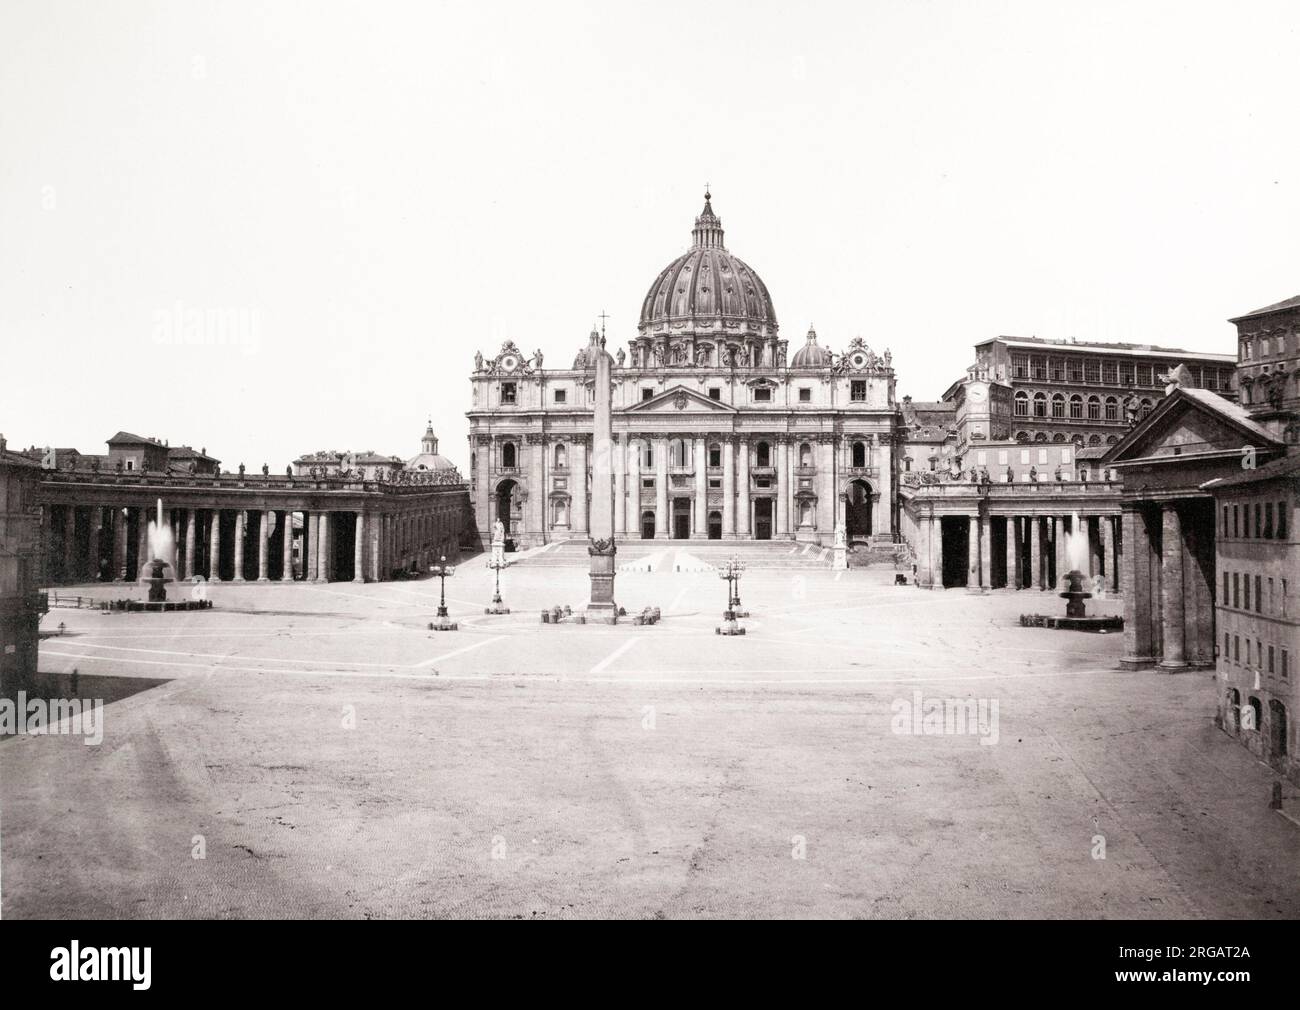 Vintage 19th century photograph: St Peter's Square and the Vatican, Rome, Italy. Stock Photo